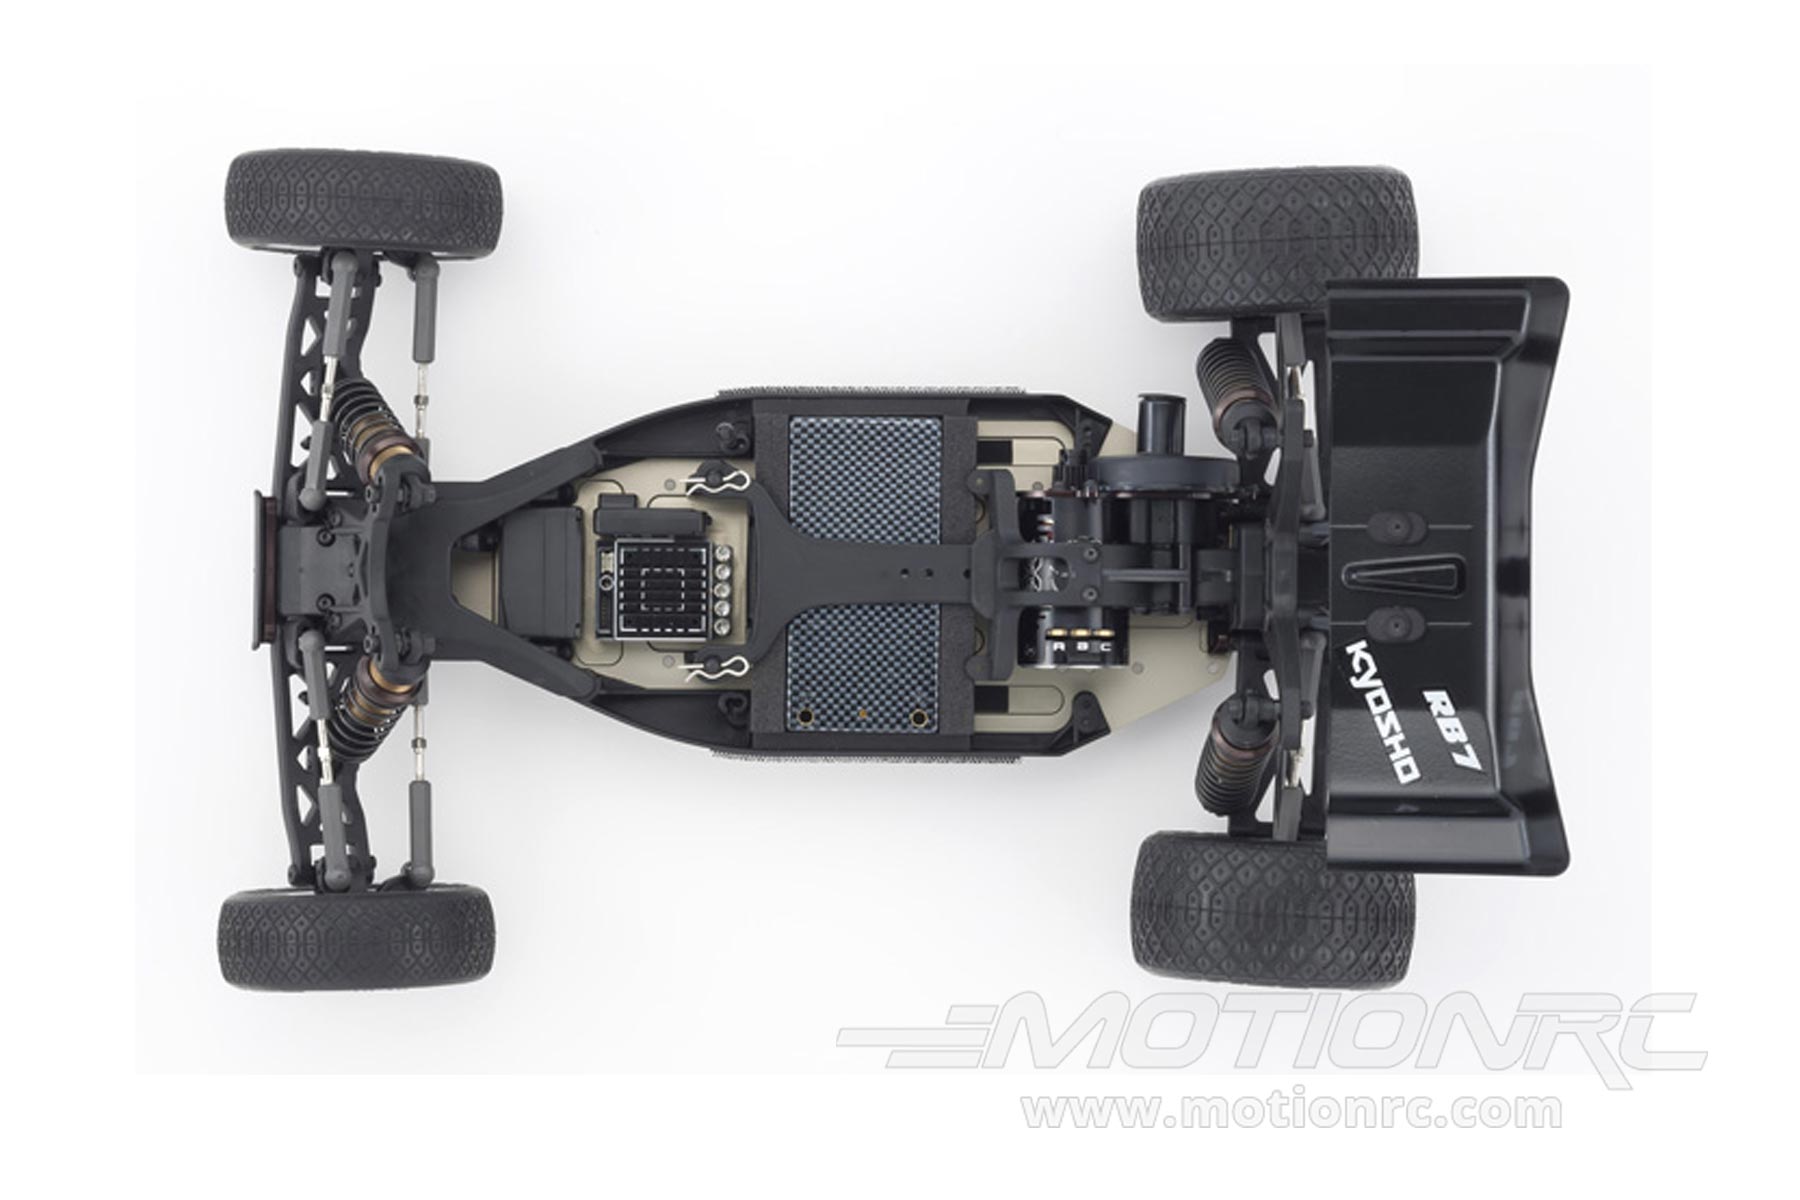 Light-Weight Chassis With Optimal Flex